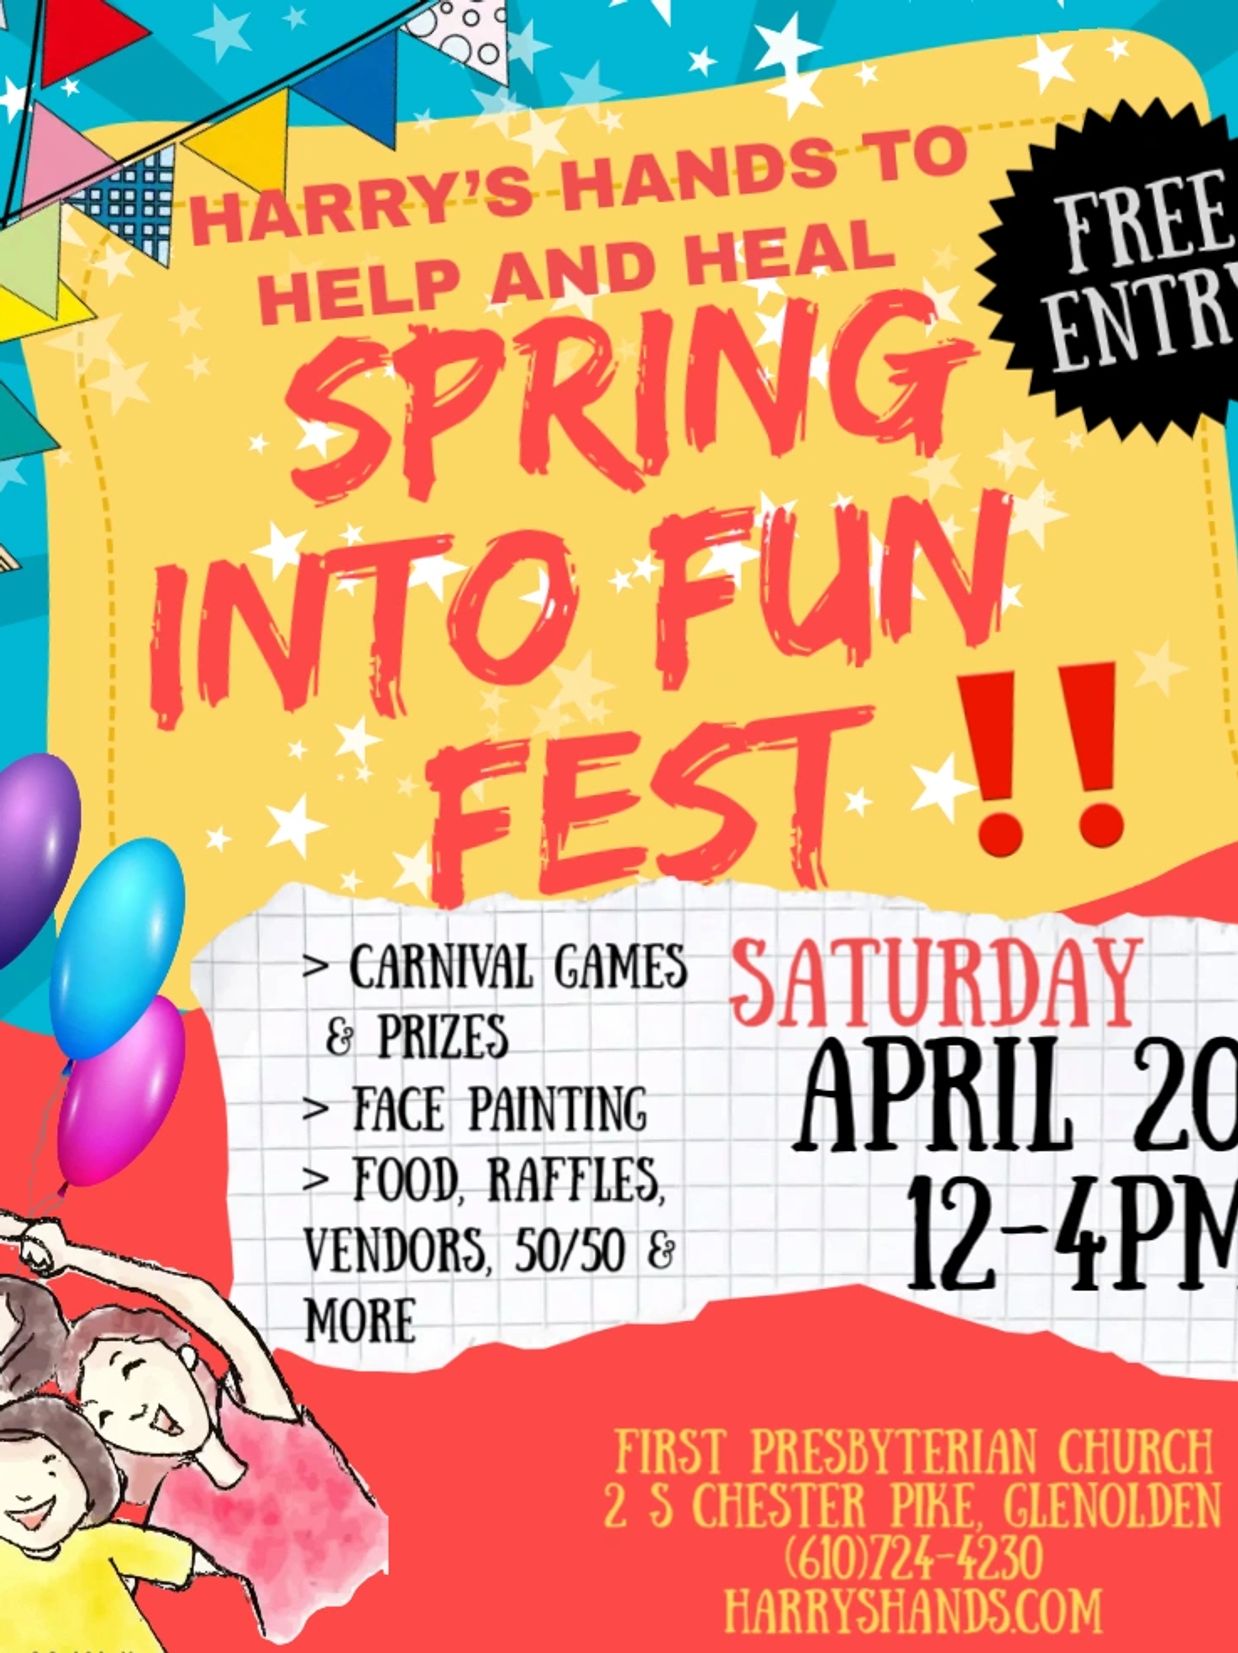 What to expect
~CARNIVAL GAMES  & PRIZES
     ~  FACE PAINTING (FREE)
     ~﻿FOOD, RAFFLES, VENDORS,